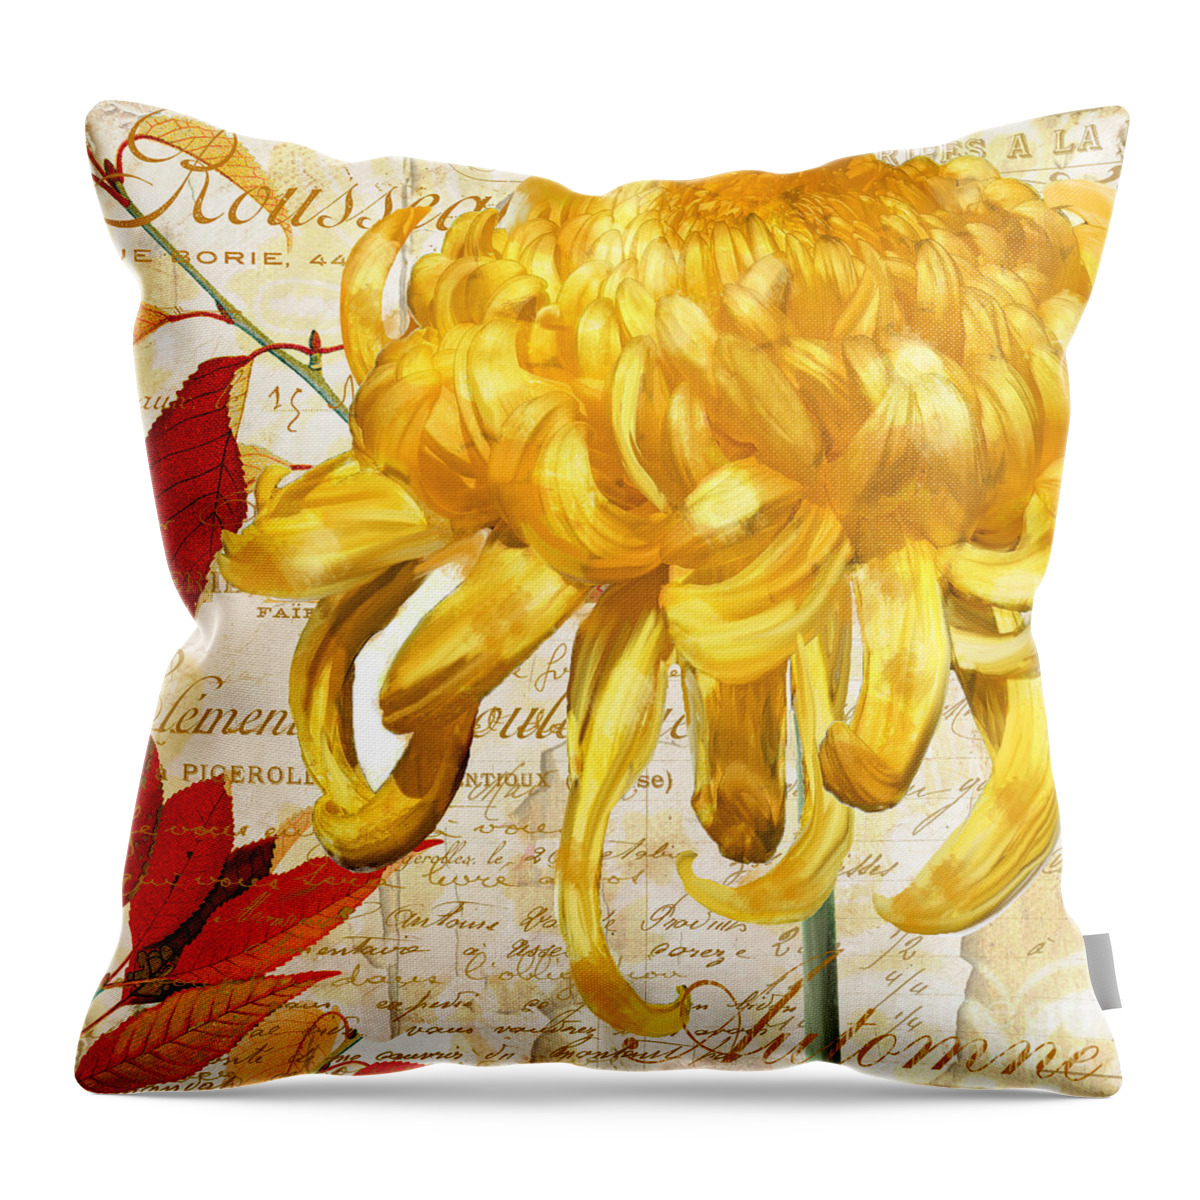 Chrysanthemums Throw Pillow featuring the painting Chrysanthemes by Mindy Sommers